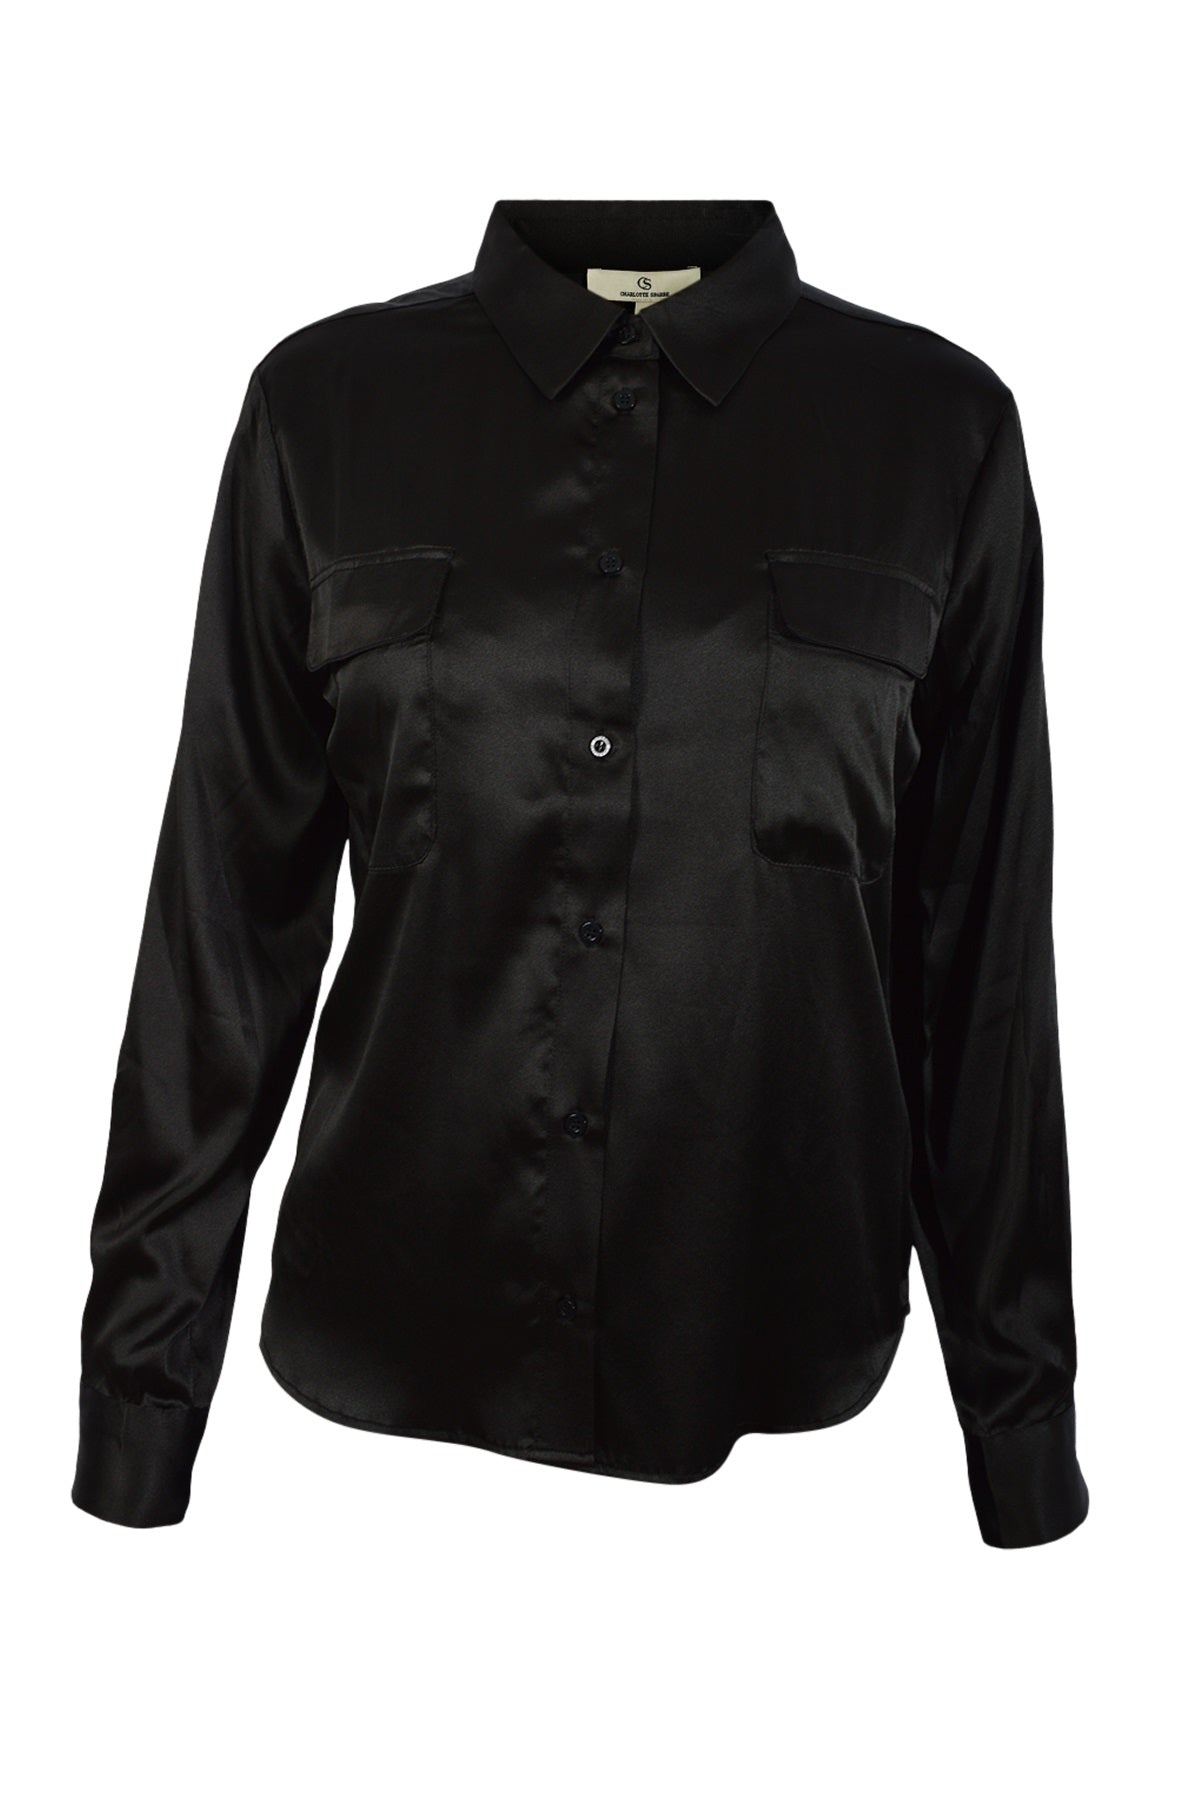 Charlotte Sparre Classic Shirt 2428 Solid, Black